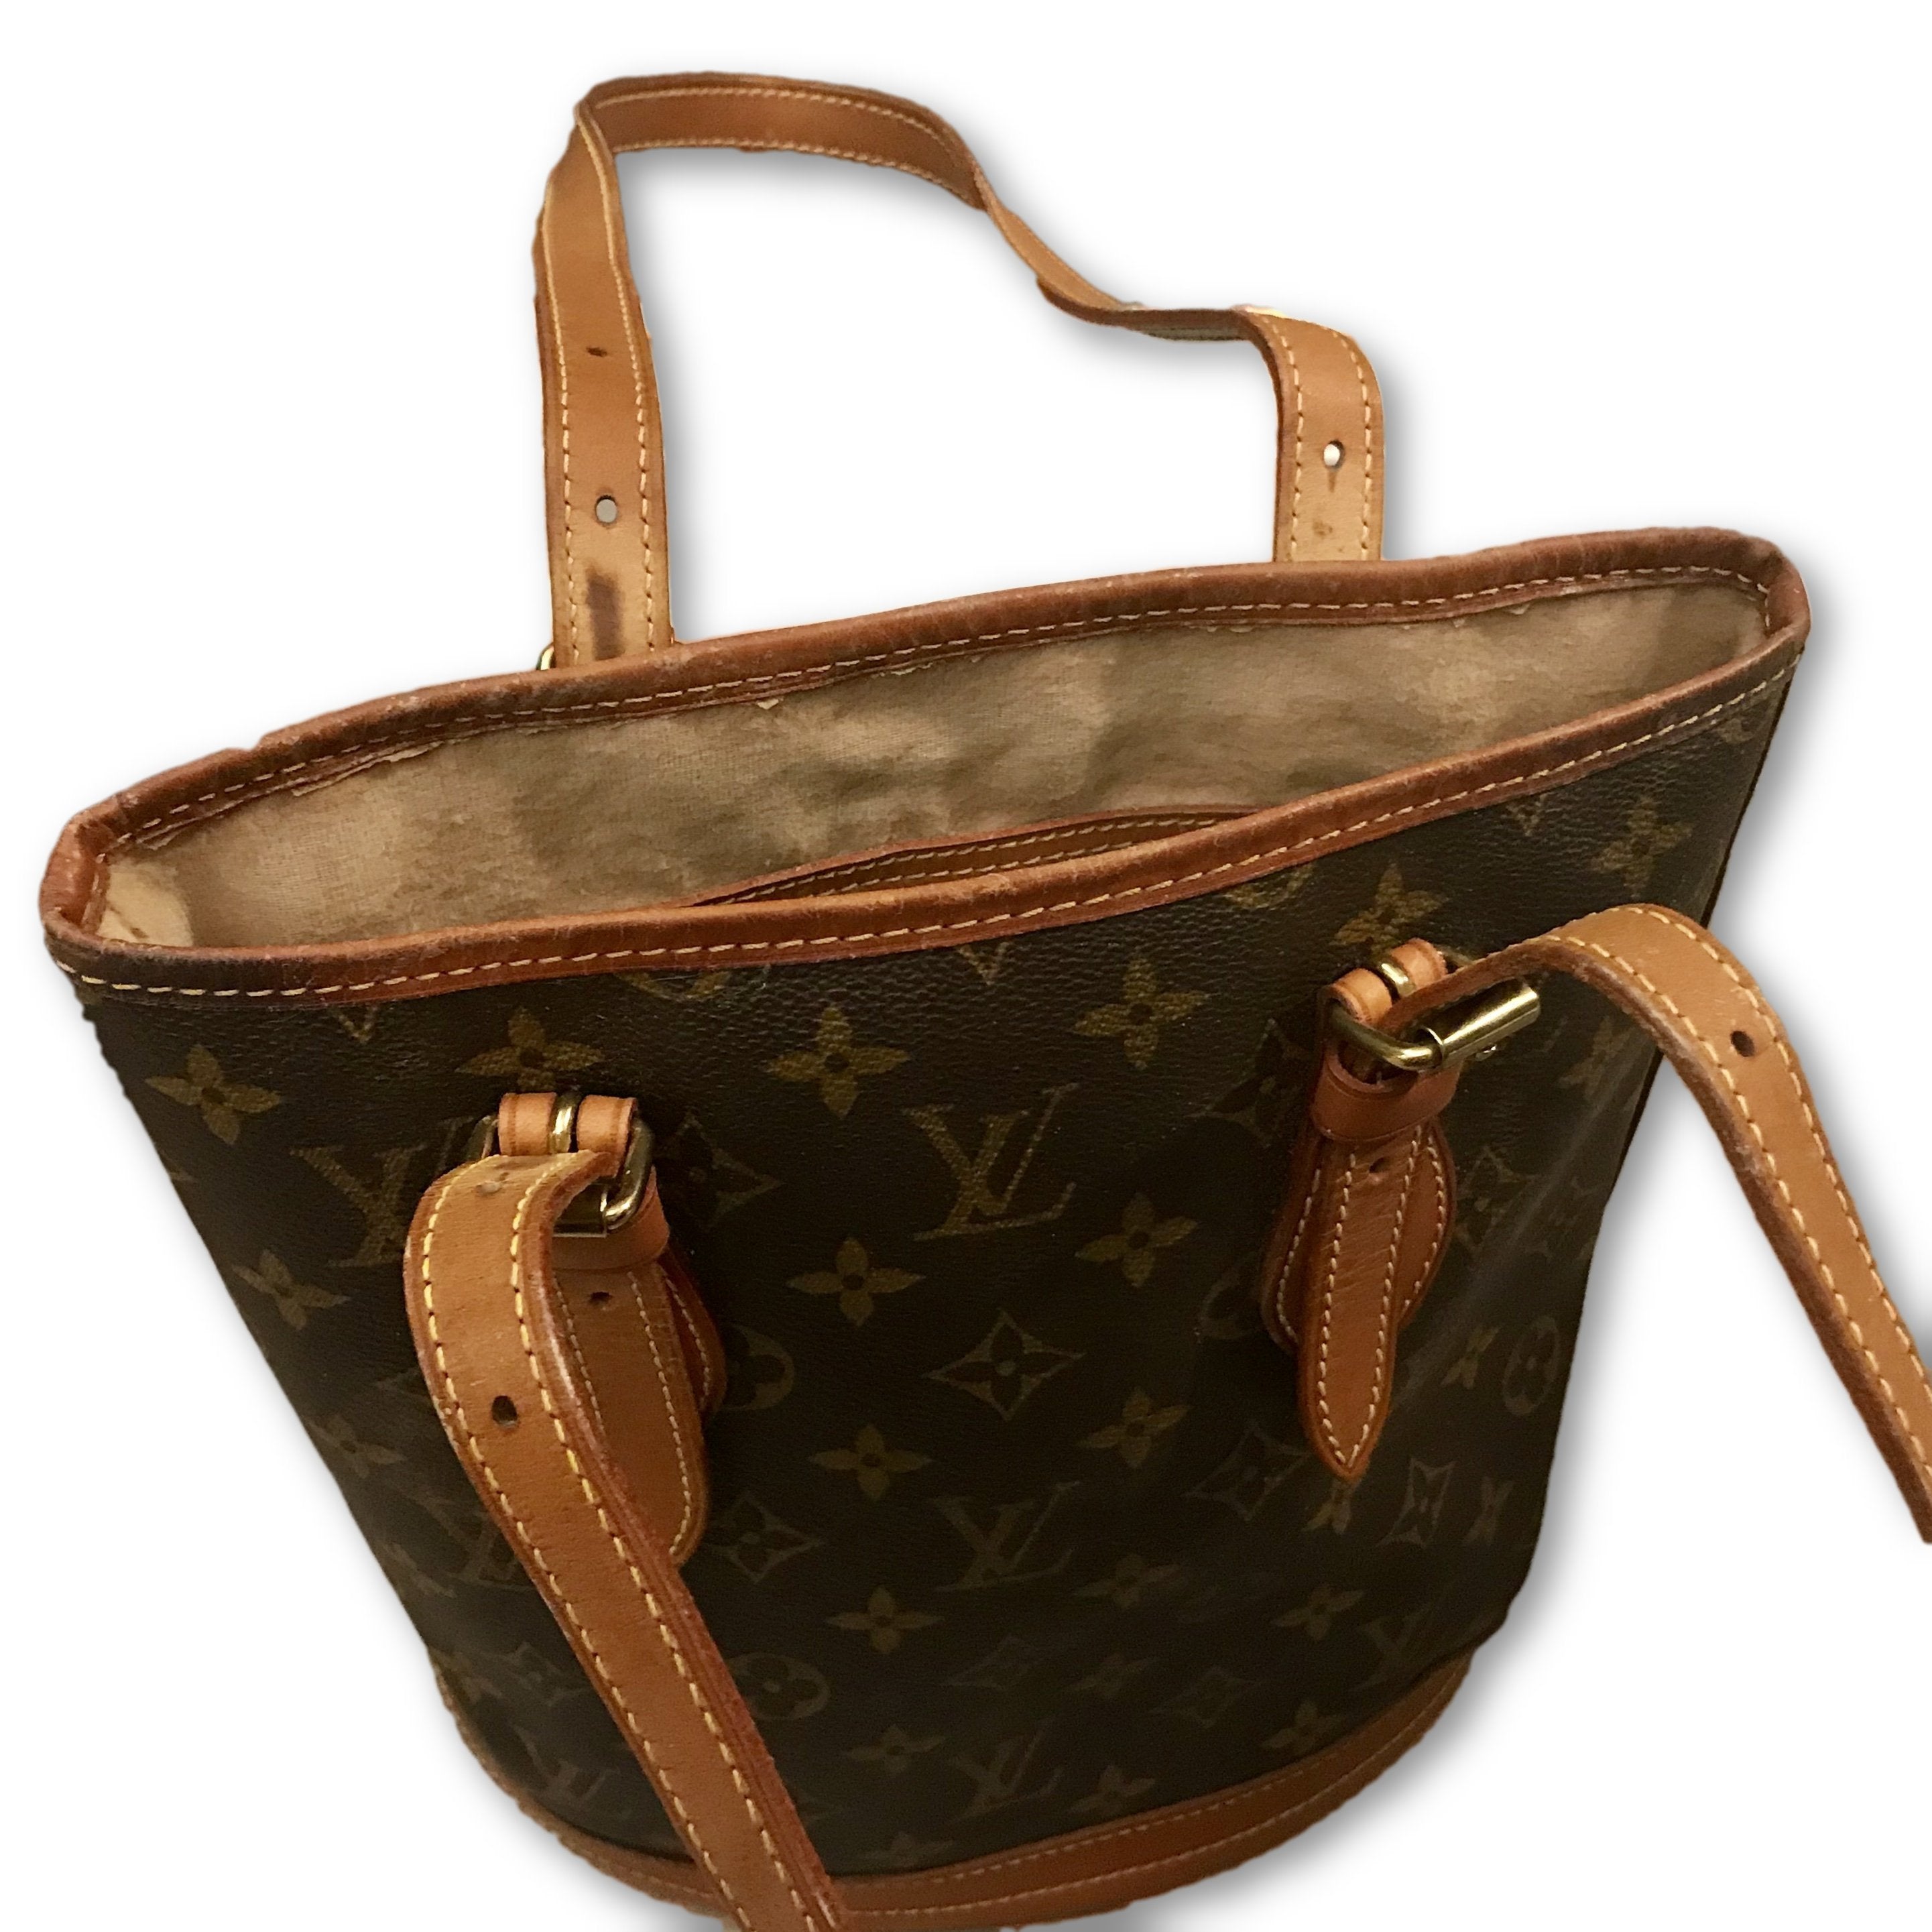 I bought a Louis Vuitton Néonoé bucket bag for my mother. This is